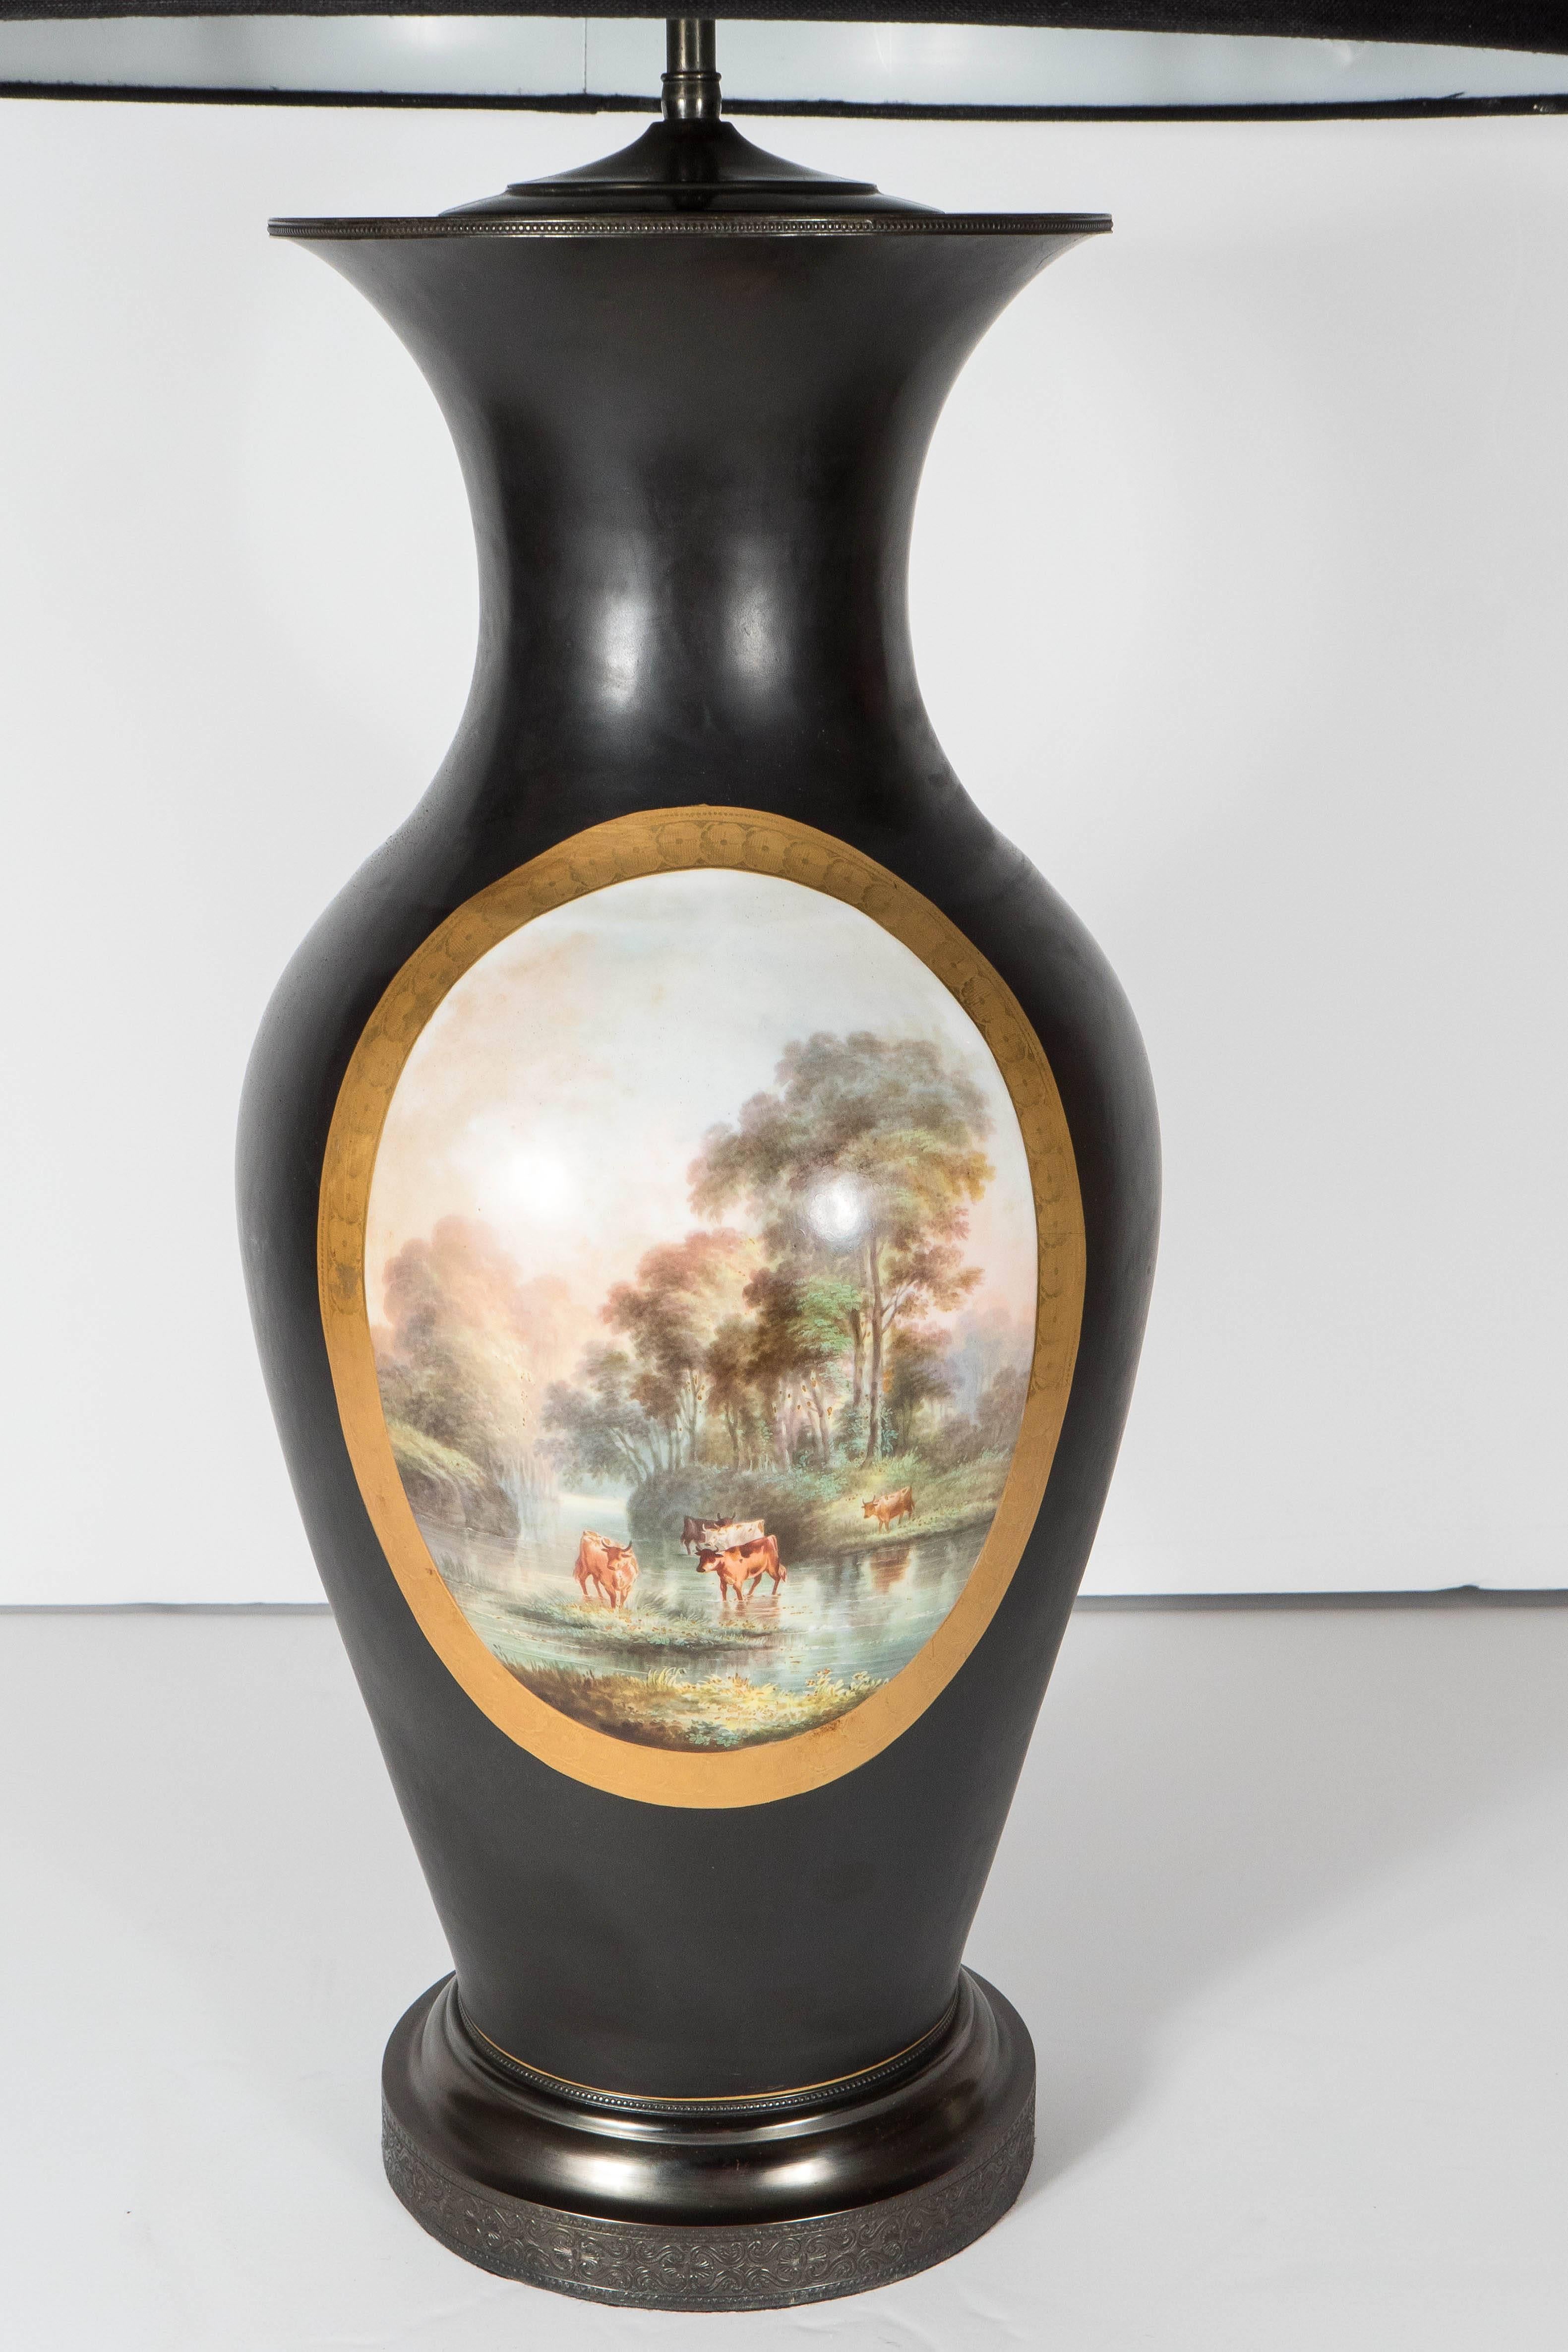 These elegant table lamps were created in England, circa 1945, repurposing antique vases from the early 20th century. The urn form matte black bisque finish bodies of the lamps feature oval medallions in the center, featuring pastoral scenes